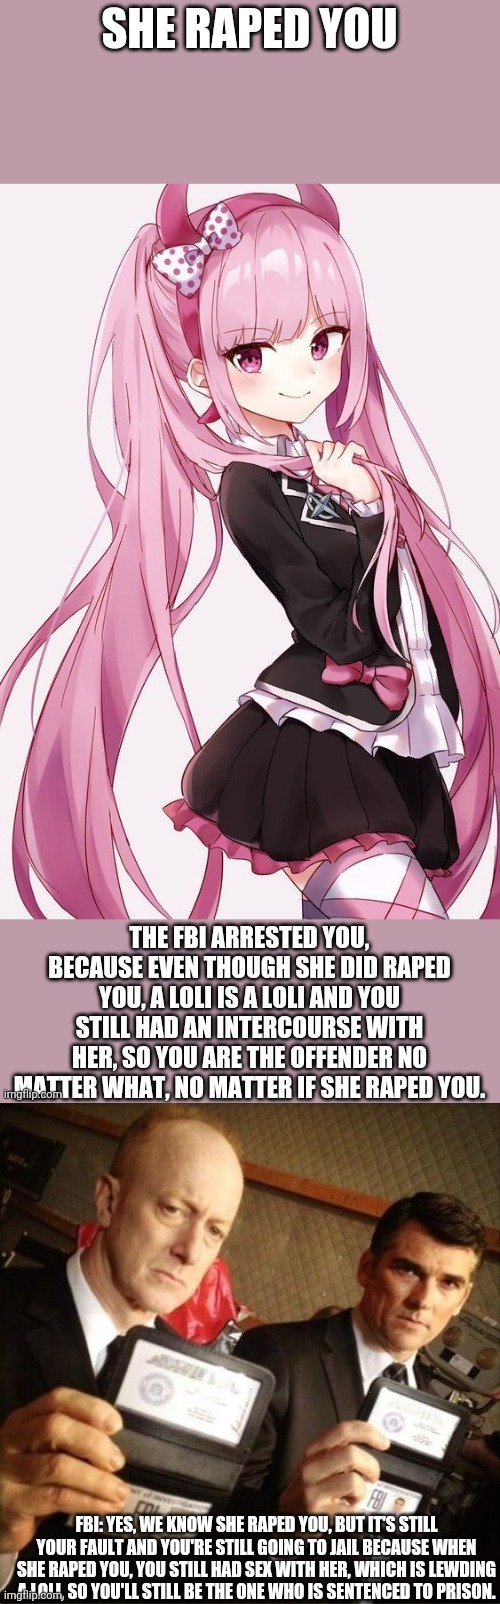 If a loli raped you, you're still going to prison since this is lewd | FBI: YES, WE KNOW SHE RAPED YOU, BUT IT'S STILL YOUR FAULT AND YOU'RE STILL GOING TO JAIL BECAUSE WHEN SHE RAPED YOU, YOU STILL HAD SEX WITH HER, WHICH IS LEWDING A LOLI, SO YOU'LL STILL BE THE ONE WHO IS SENTENCED TO PRISON. | image tagged in fbi,lewd,loli,prison,jail,rape | made w/ Imgflip meme maker